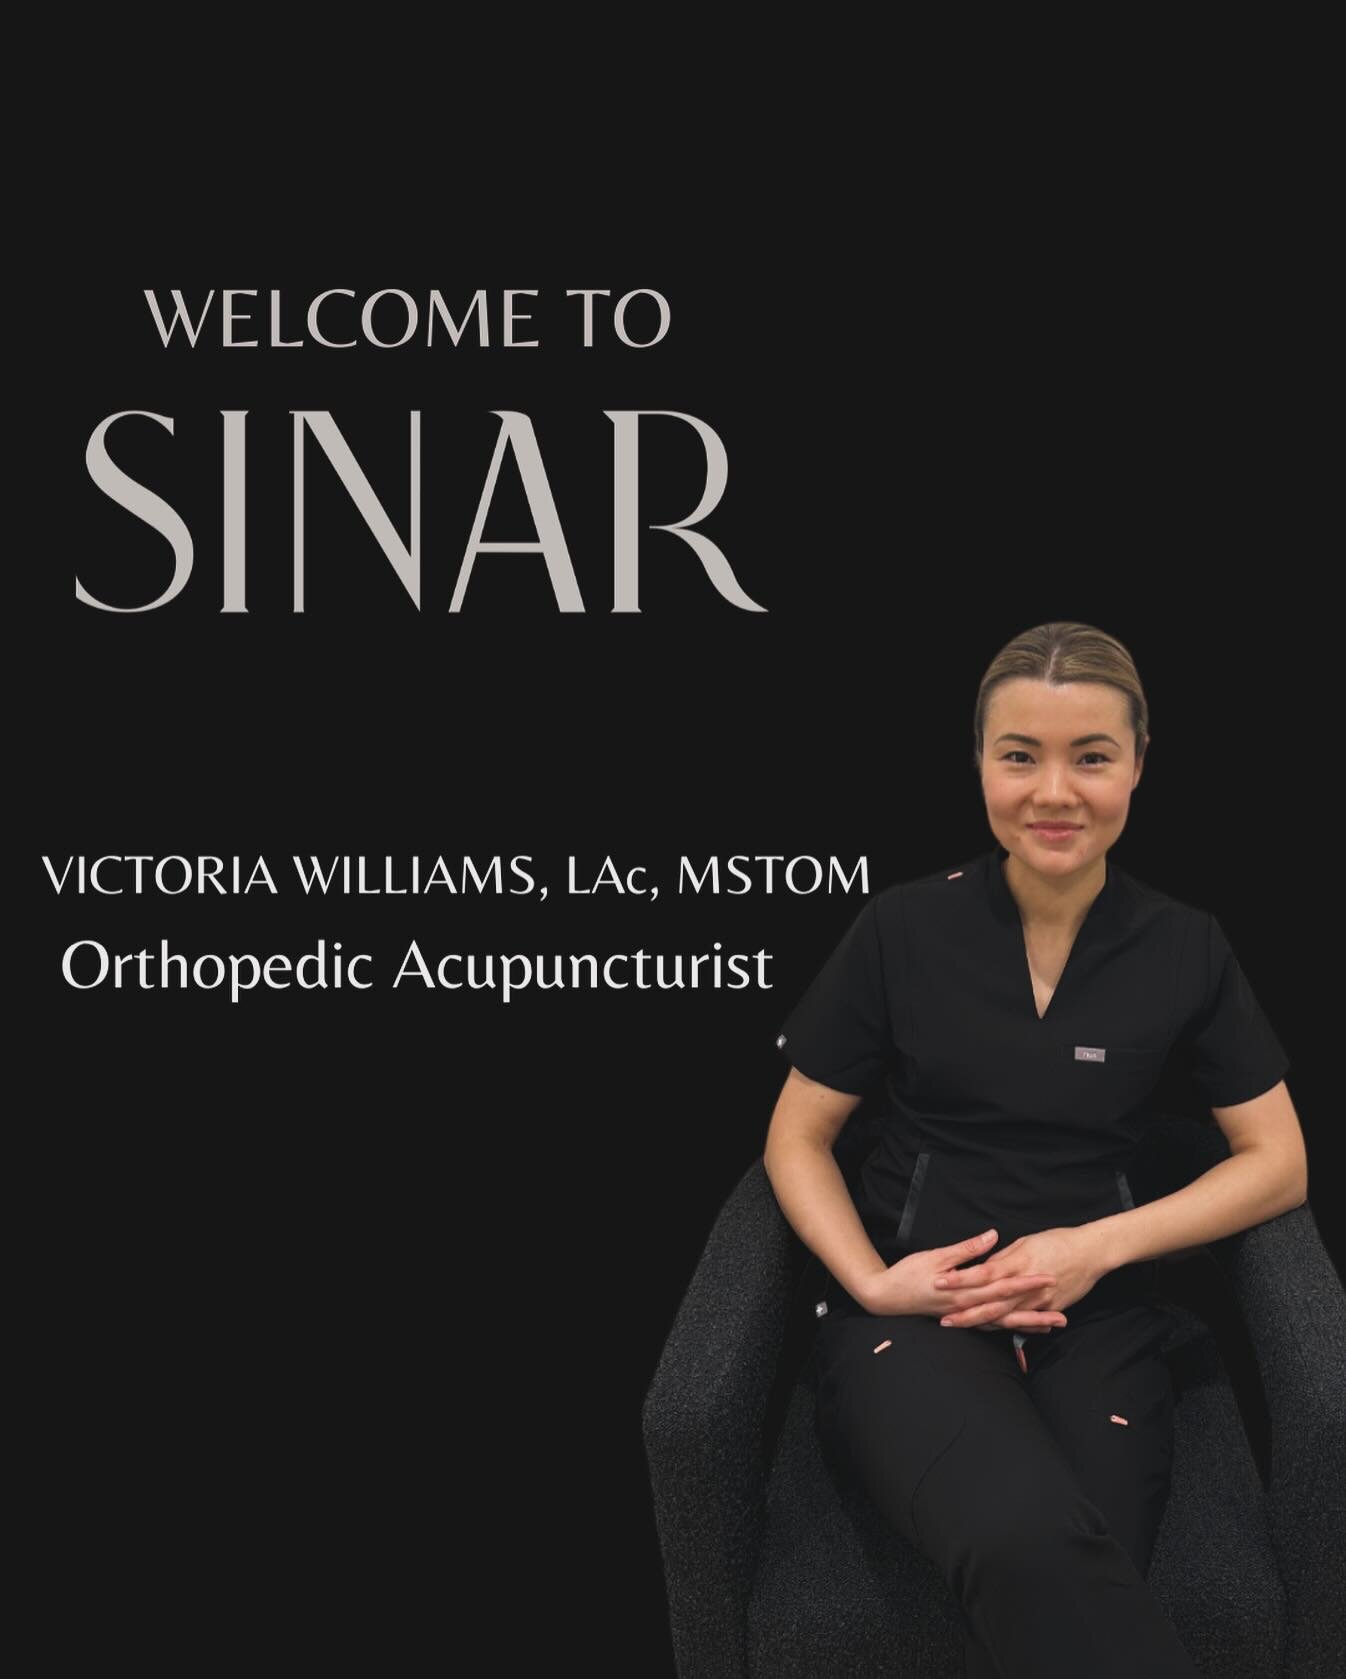 A very warm welcome to our very own, Victoria Williams, Orthopedic Acupuncturist!

Victoria is a leading NYC Orthopedic Acupuncturist with a dual master&rsquo;s degree in acupuncture and traditional chinese medicine with 6 years of experience. Victor